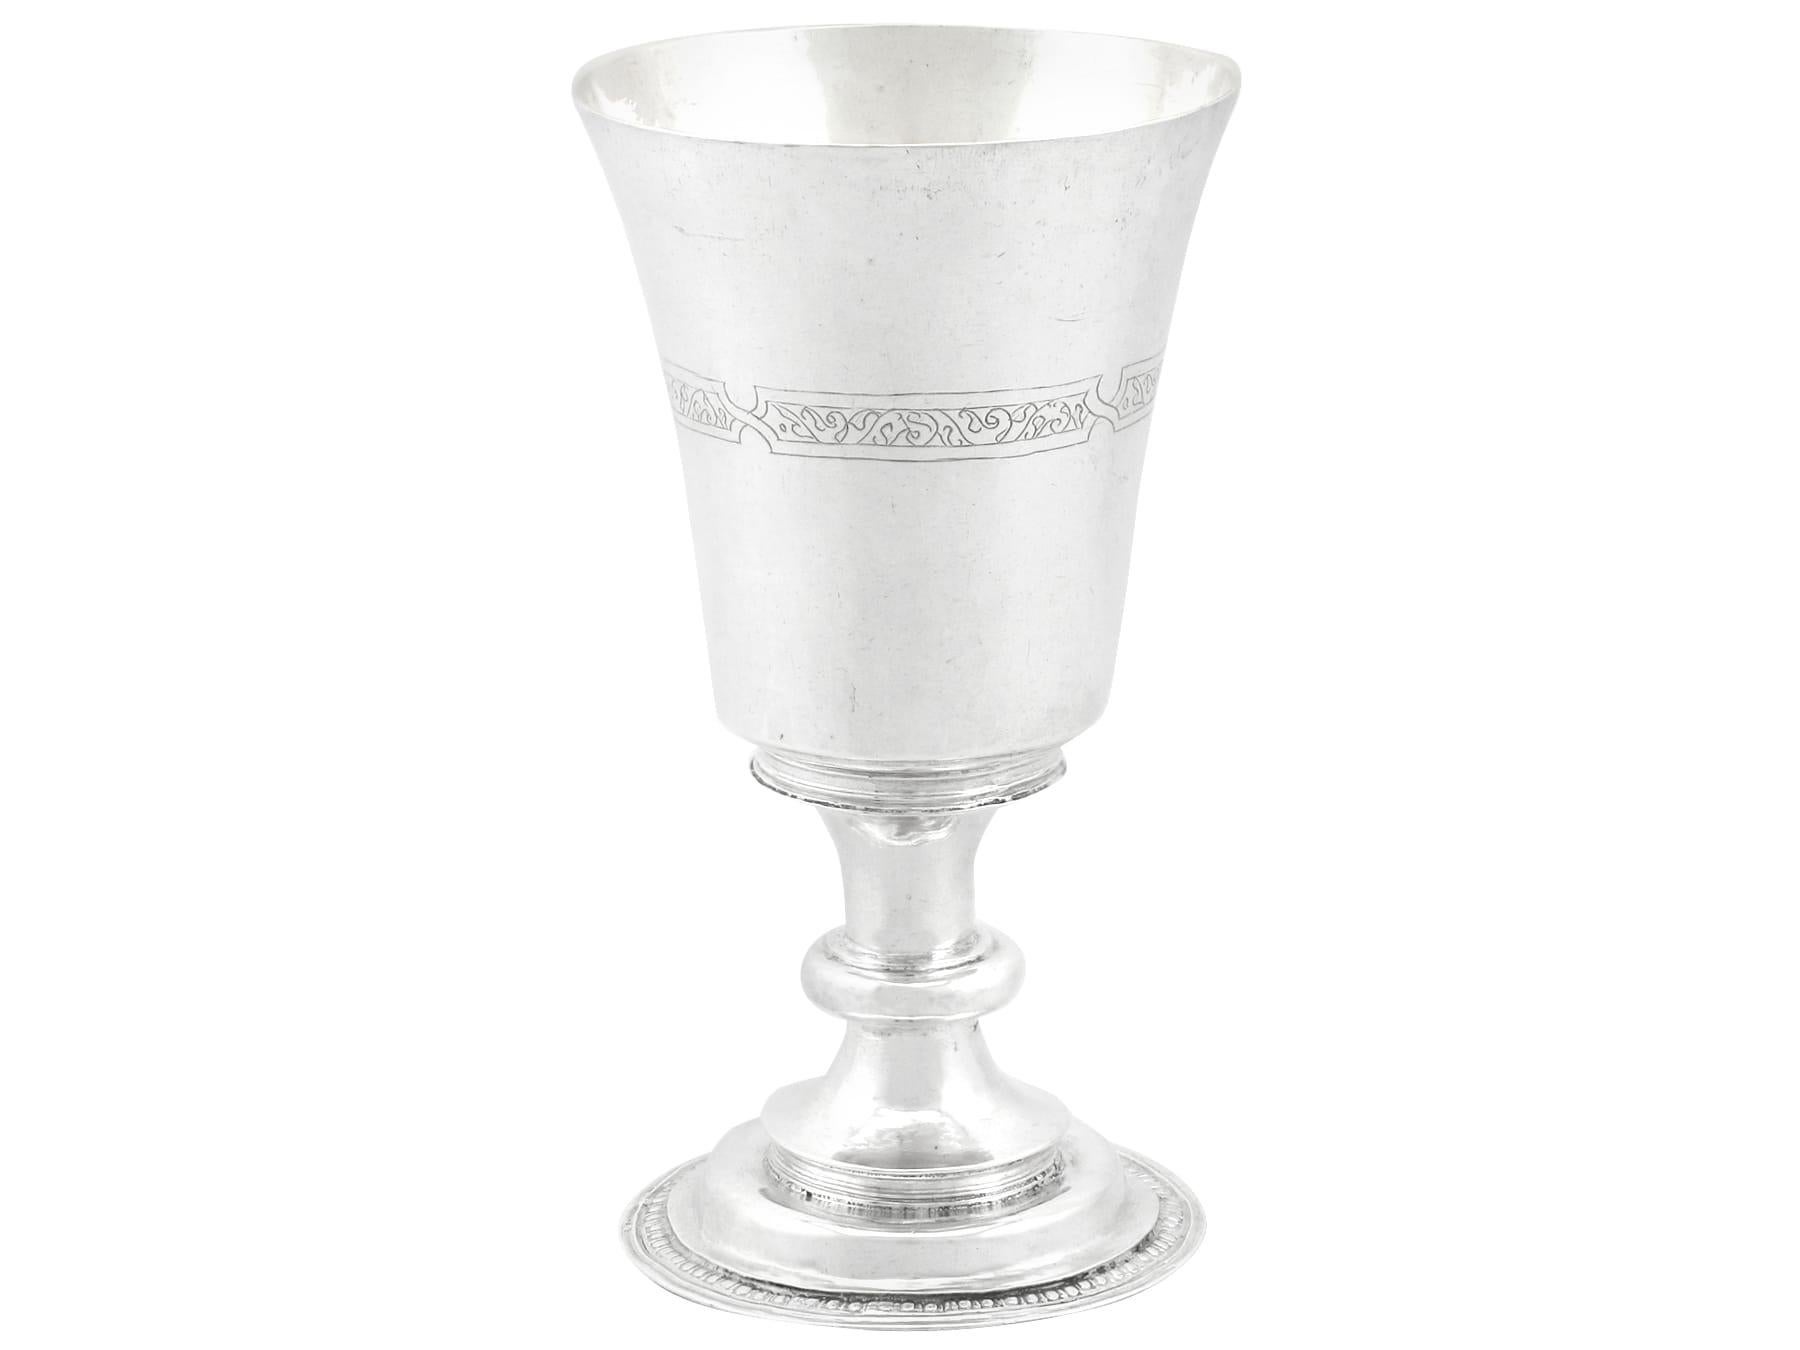 English 1500s Elizabethan Sterling Silver Communion Chalice and Paten For Sale